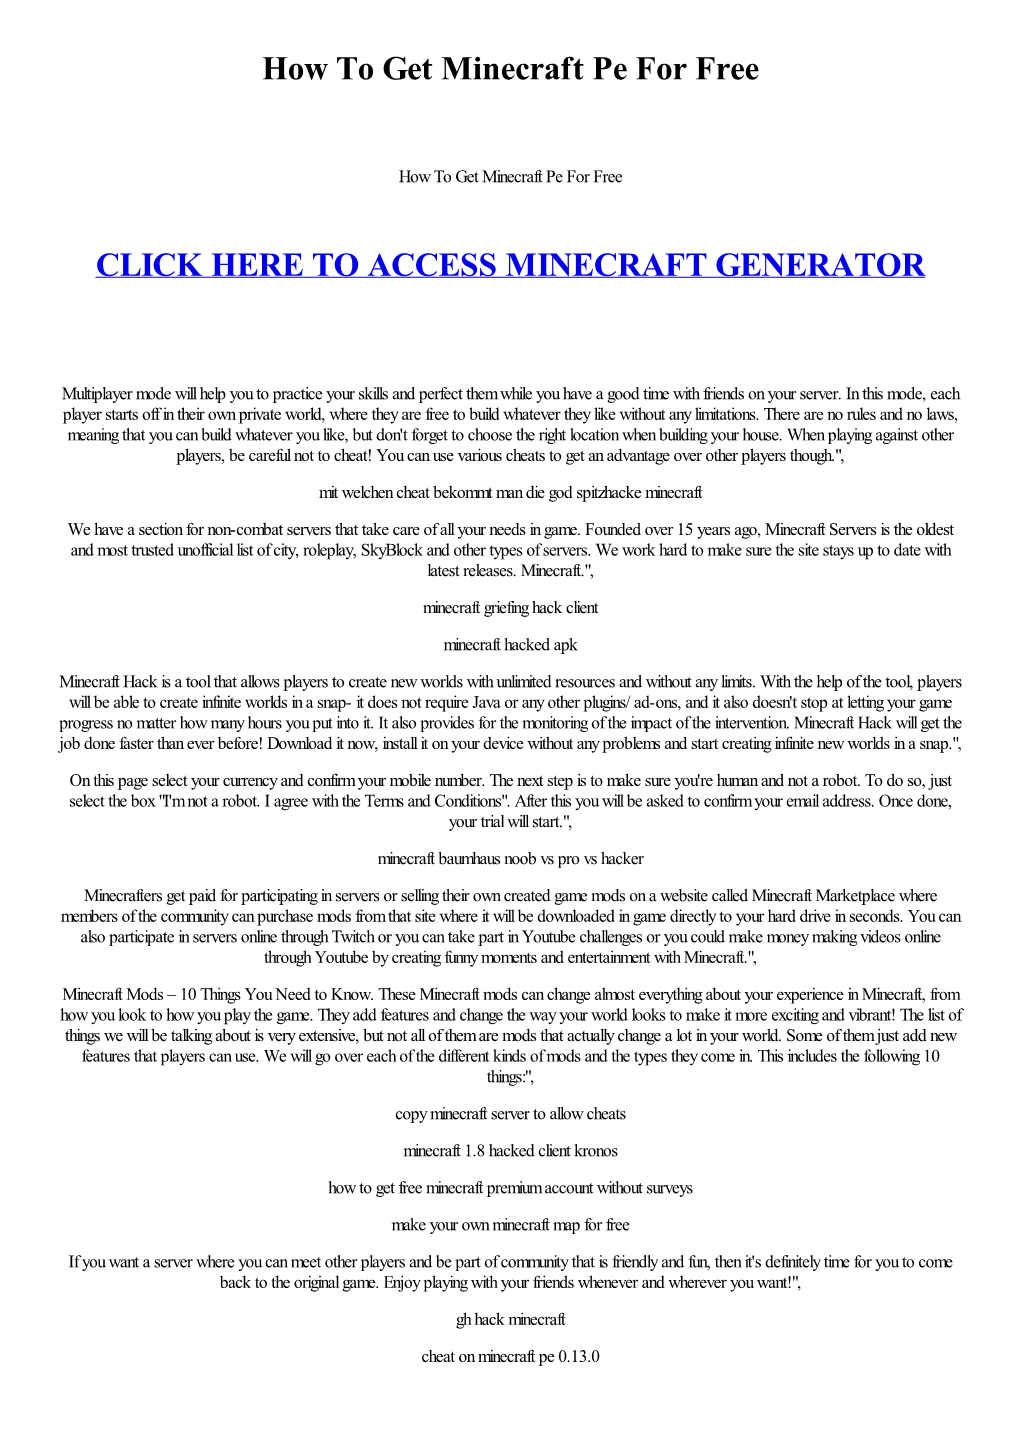 How to Get Minecraft Pe for Free